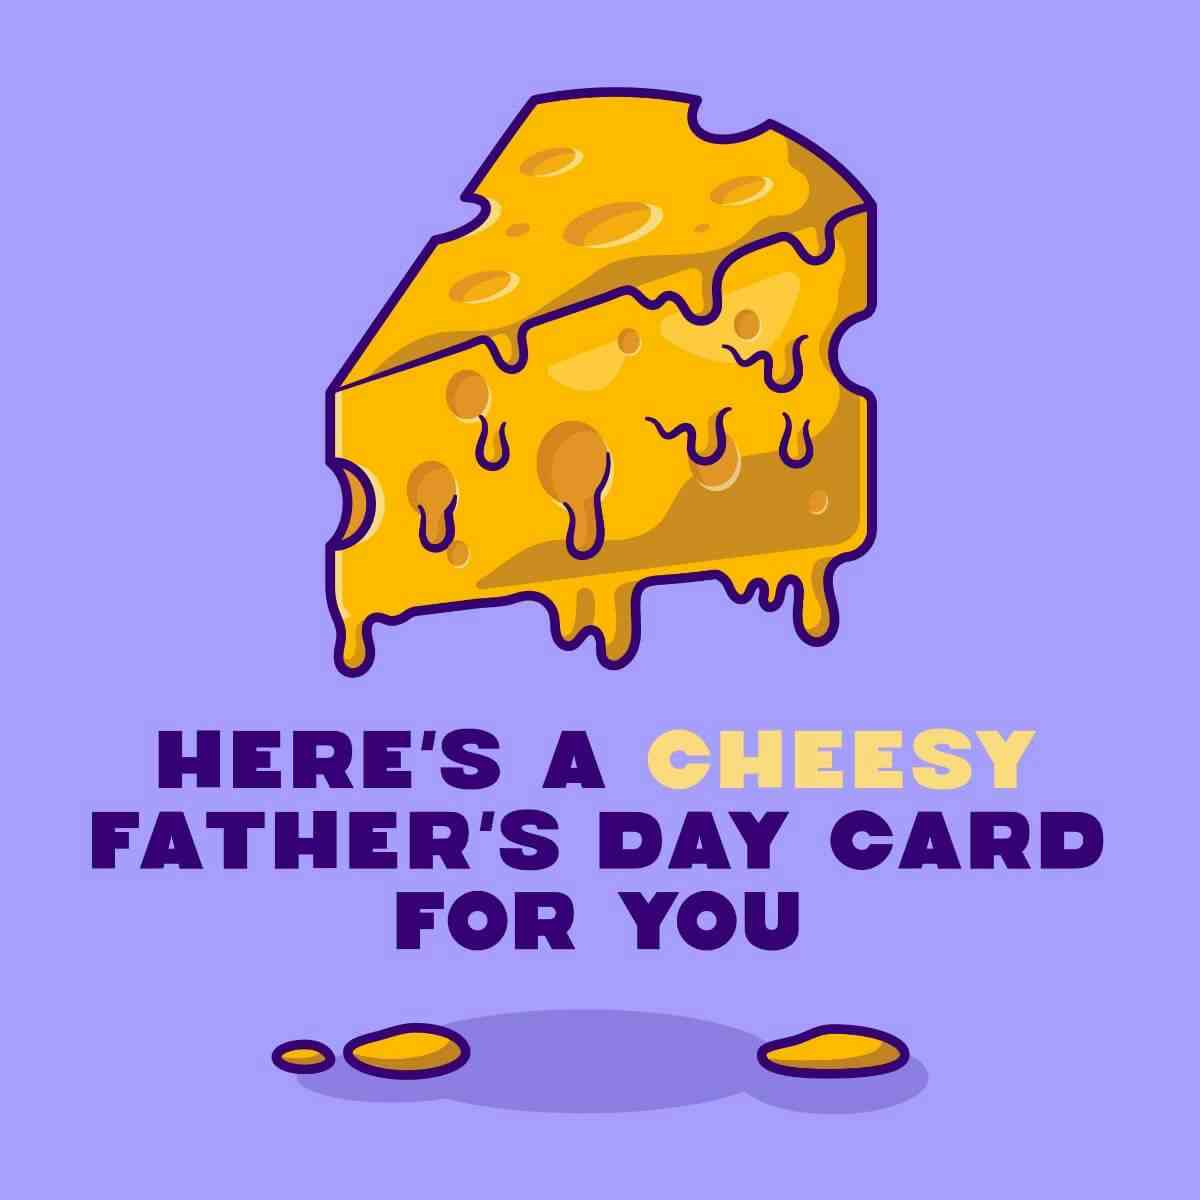 Card Here's a cheesy Father's day card for you